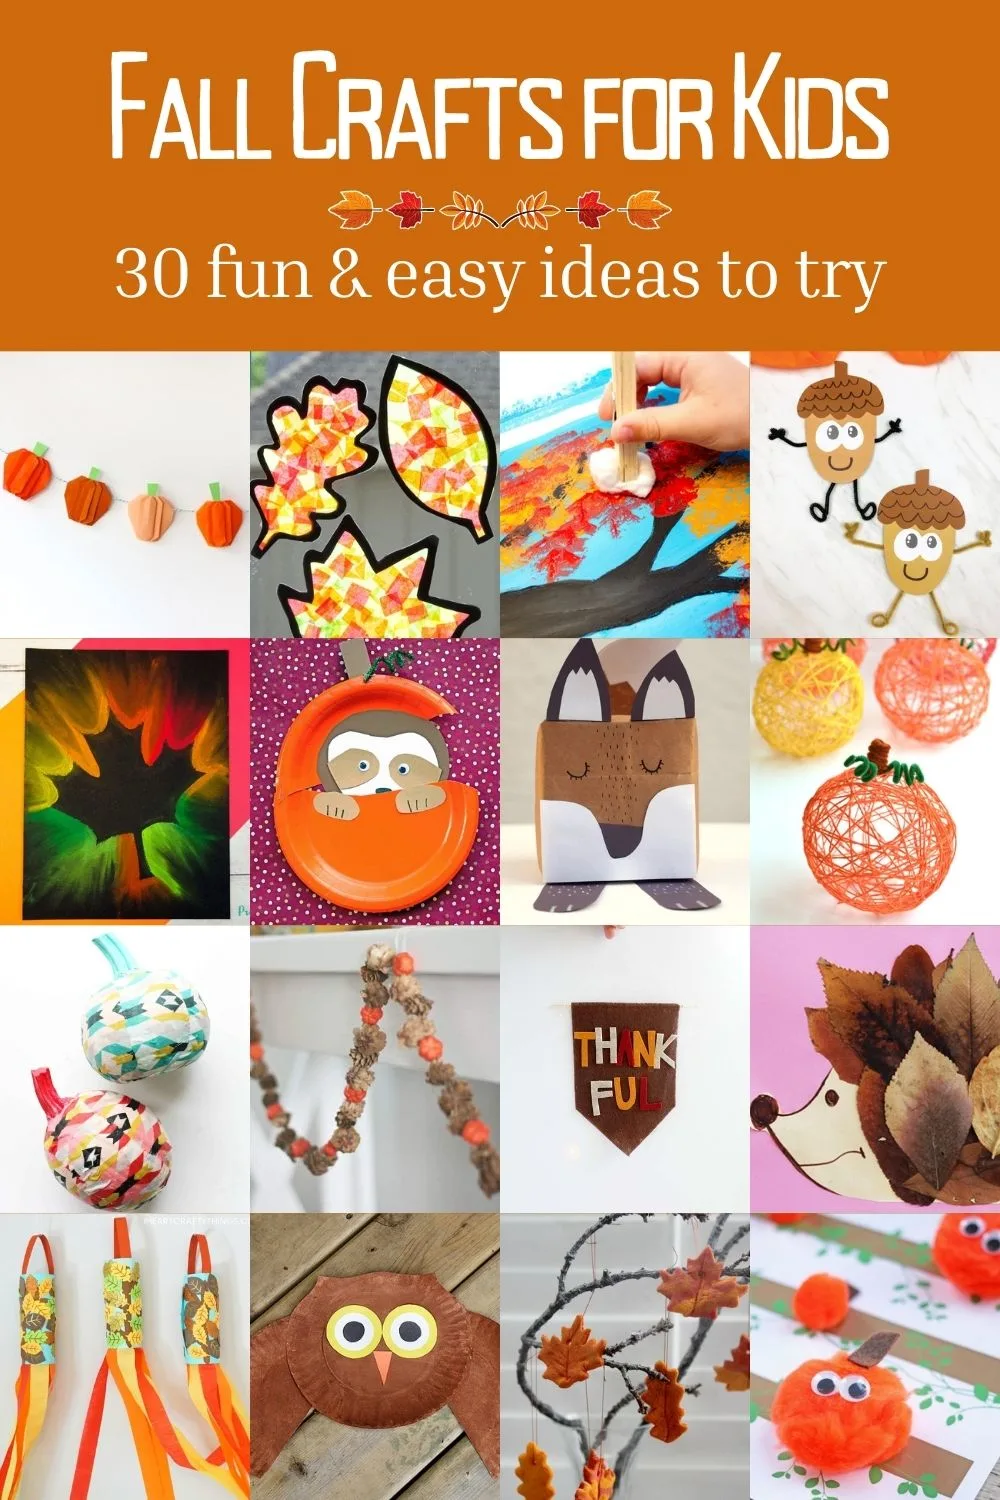 Fall Crafts For Kids - Art and Craft Ideas - Easy Peasy and Fun